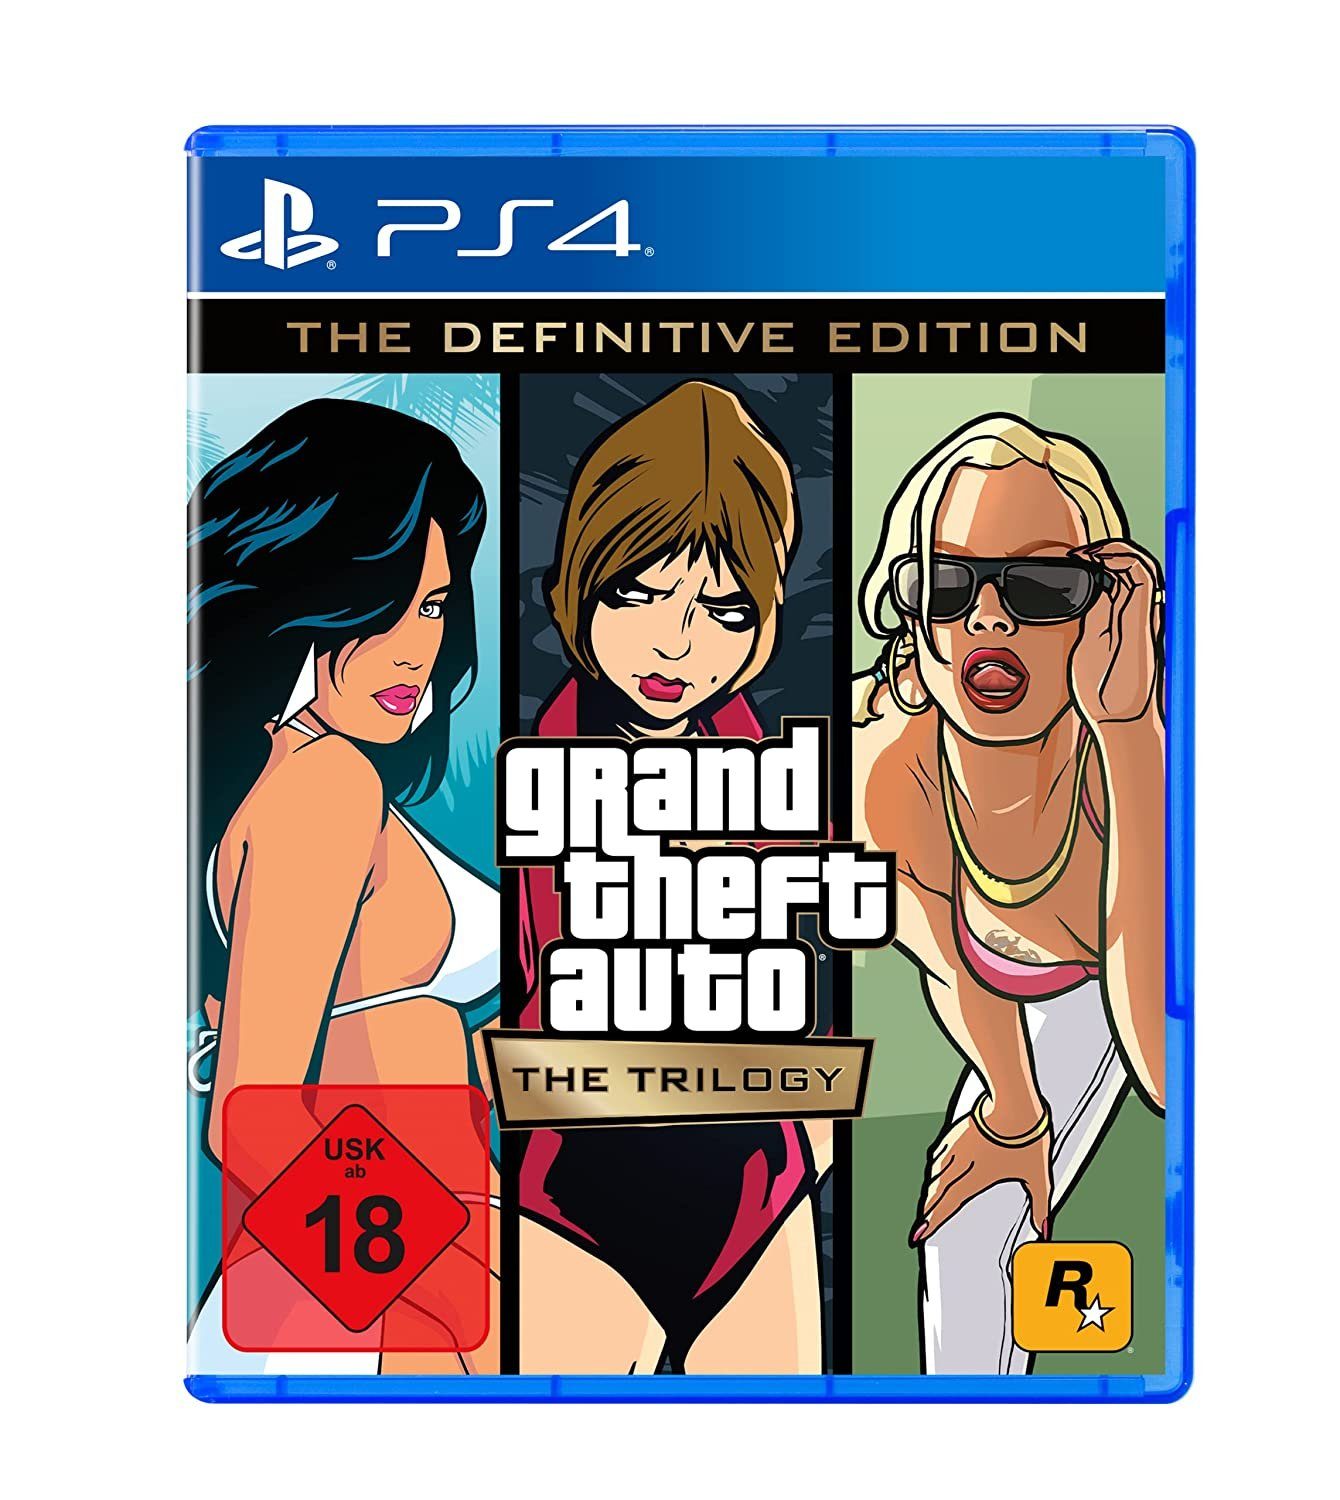 Grand Theft Auto: The Trilogy PS4 (GTA 3 + Vice City + San Andreas) PlayStation 4